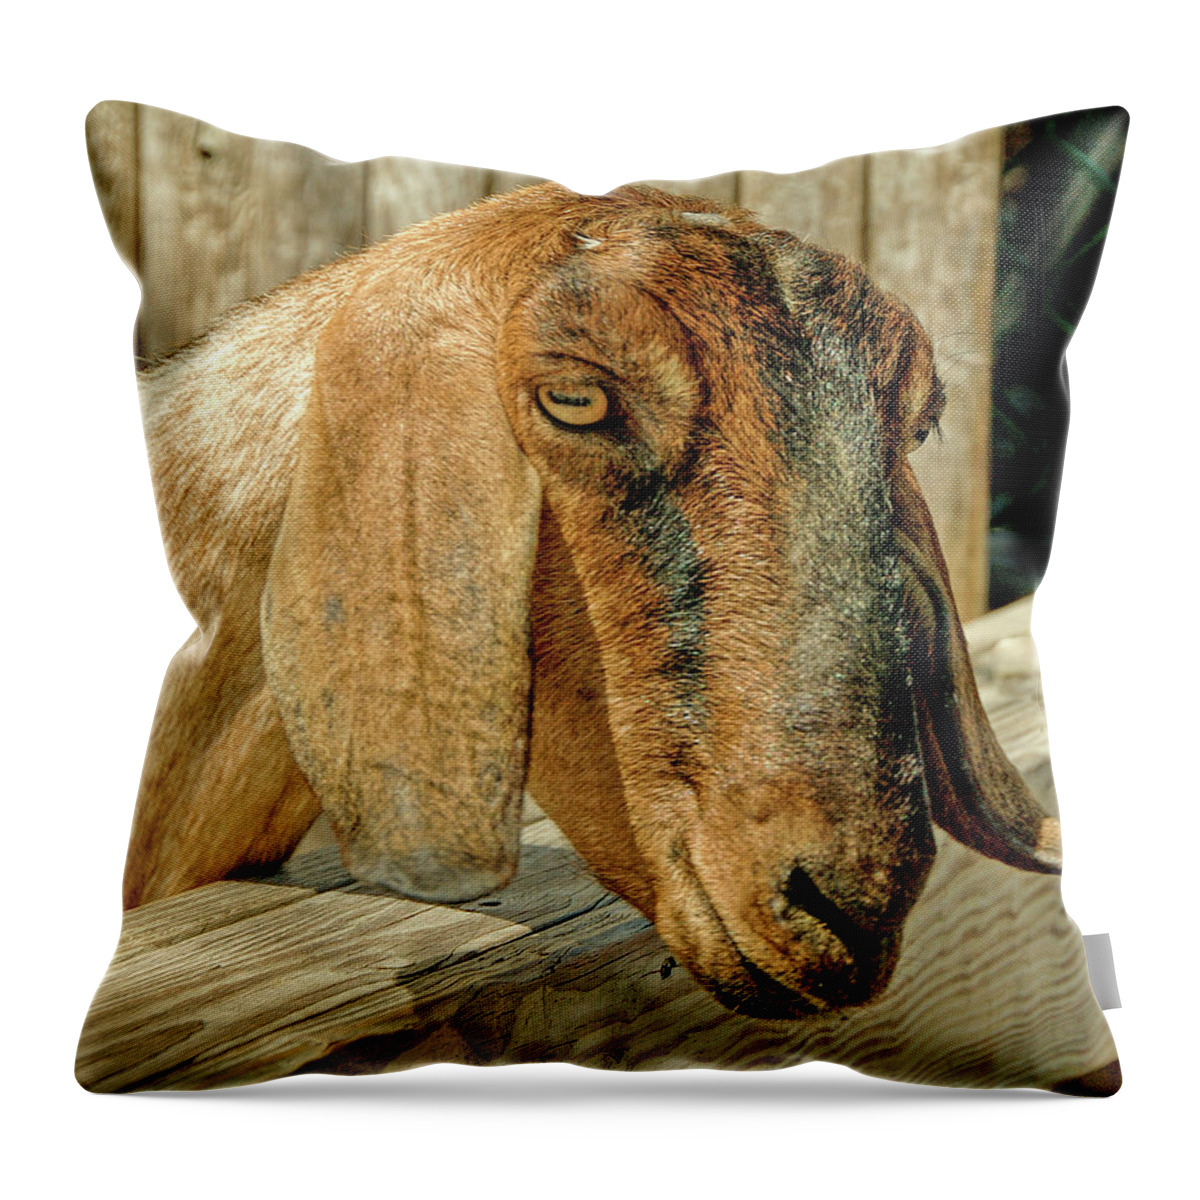 Goat Throw Pillow featuring the photograph Goat by Cathy Kovarik